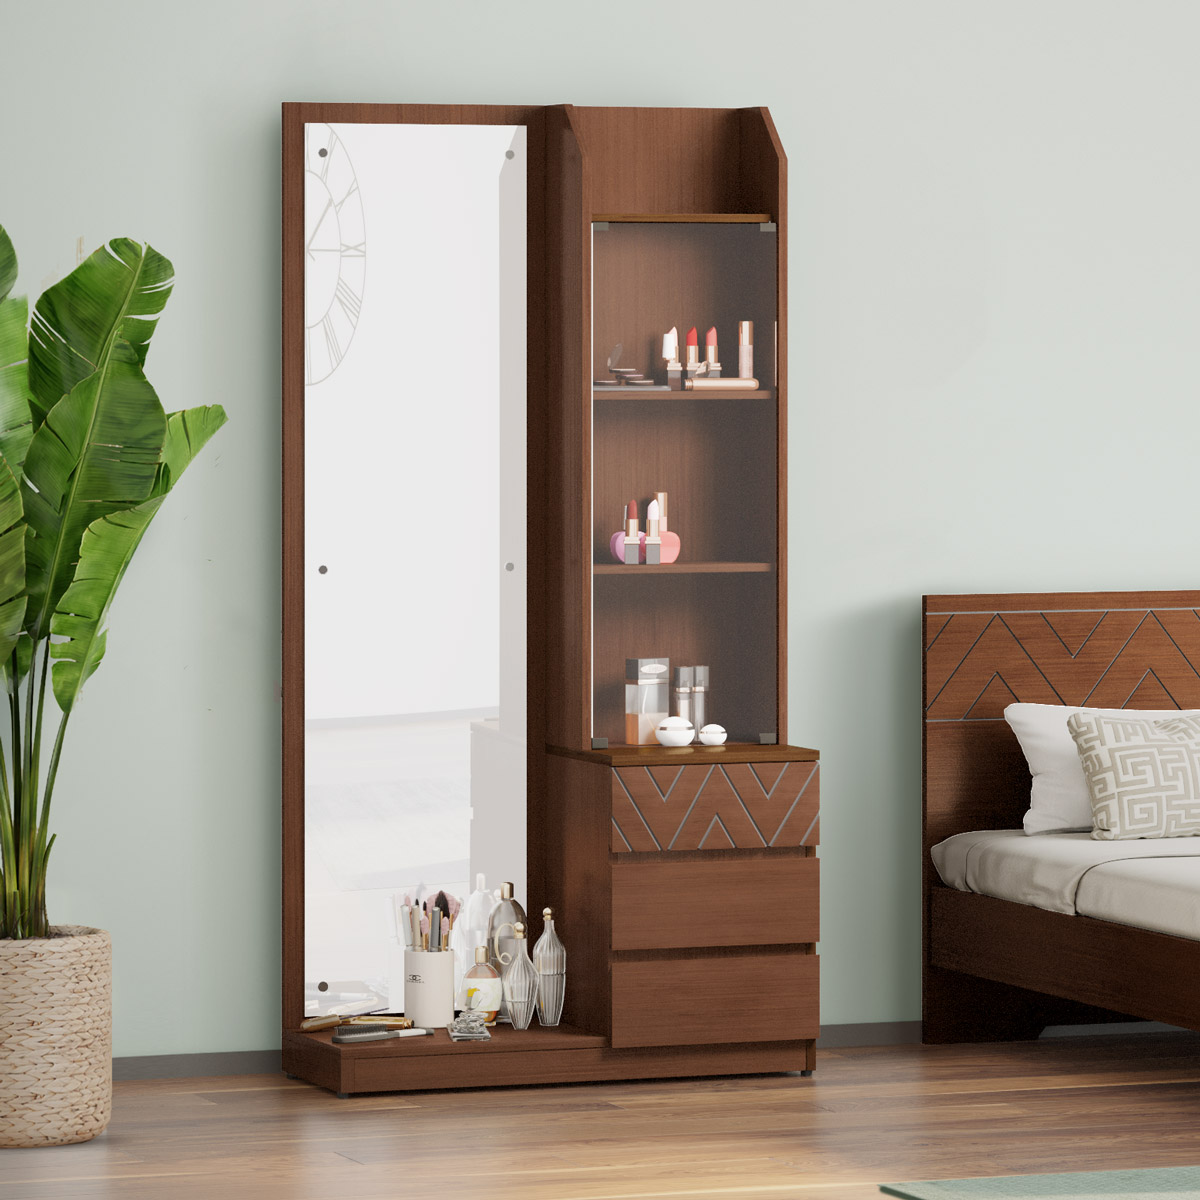 Buy Solid Wood Dressing Table Denise Online At Best Price In India | Wakefit